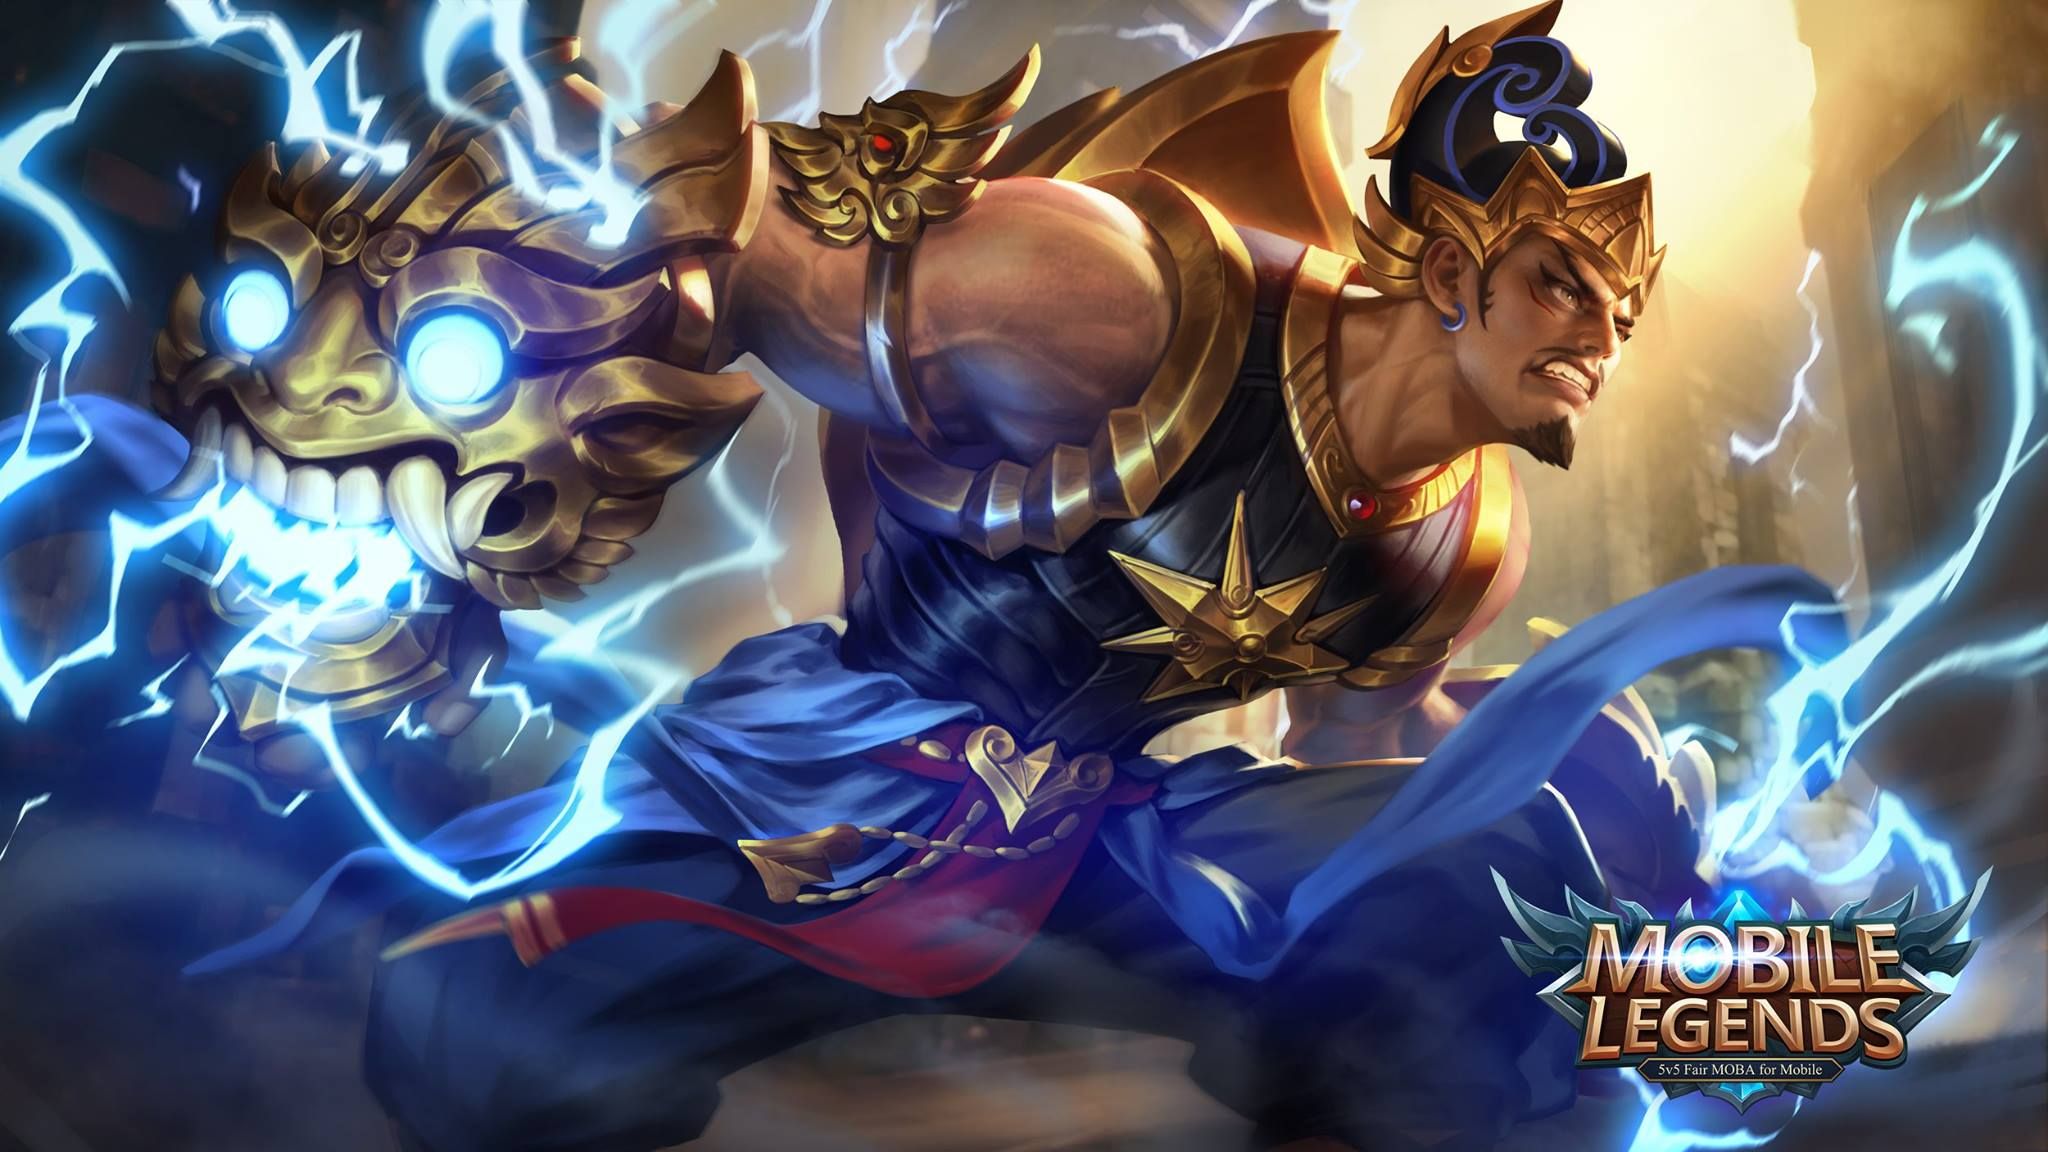 Image for Awesome Wallpaper HD Mobile Legends Ws018ml damn